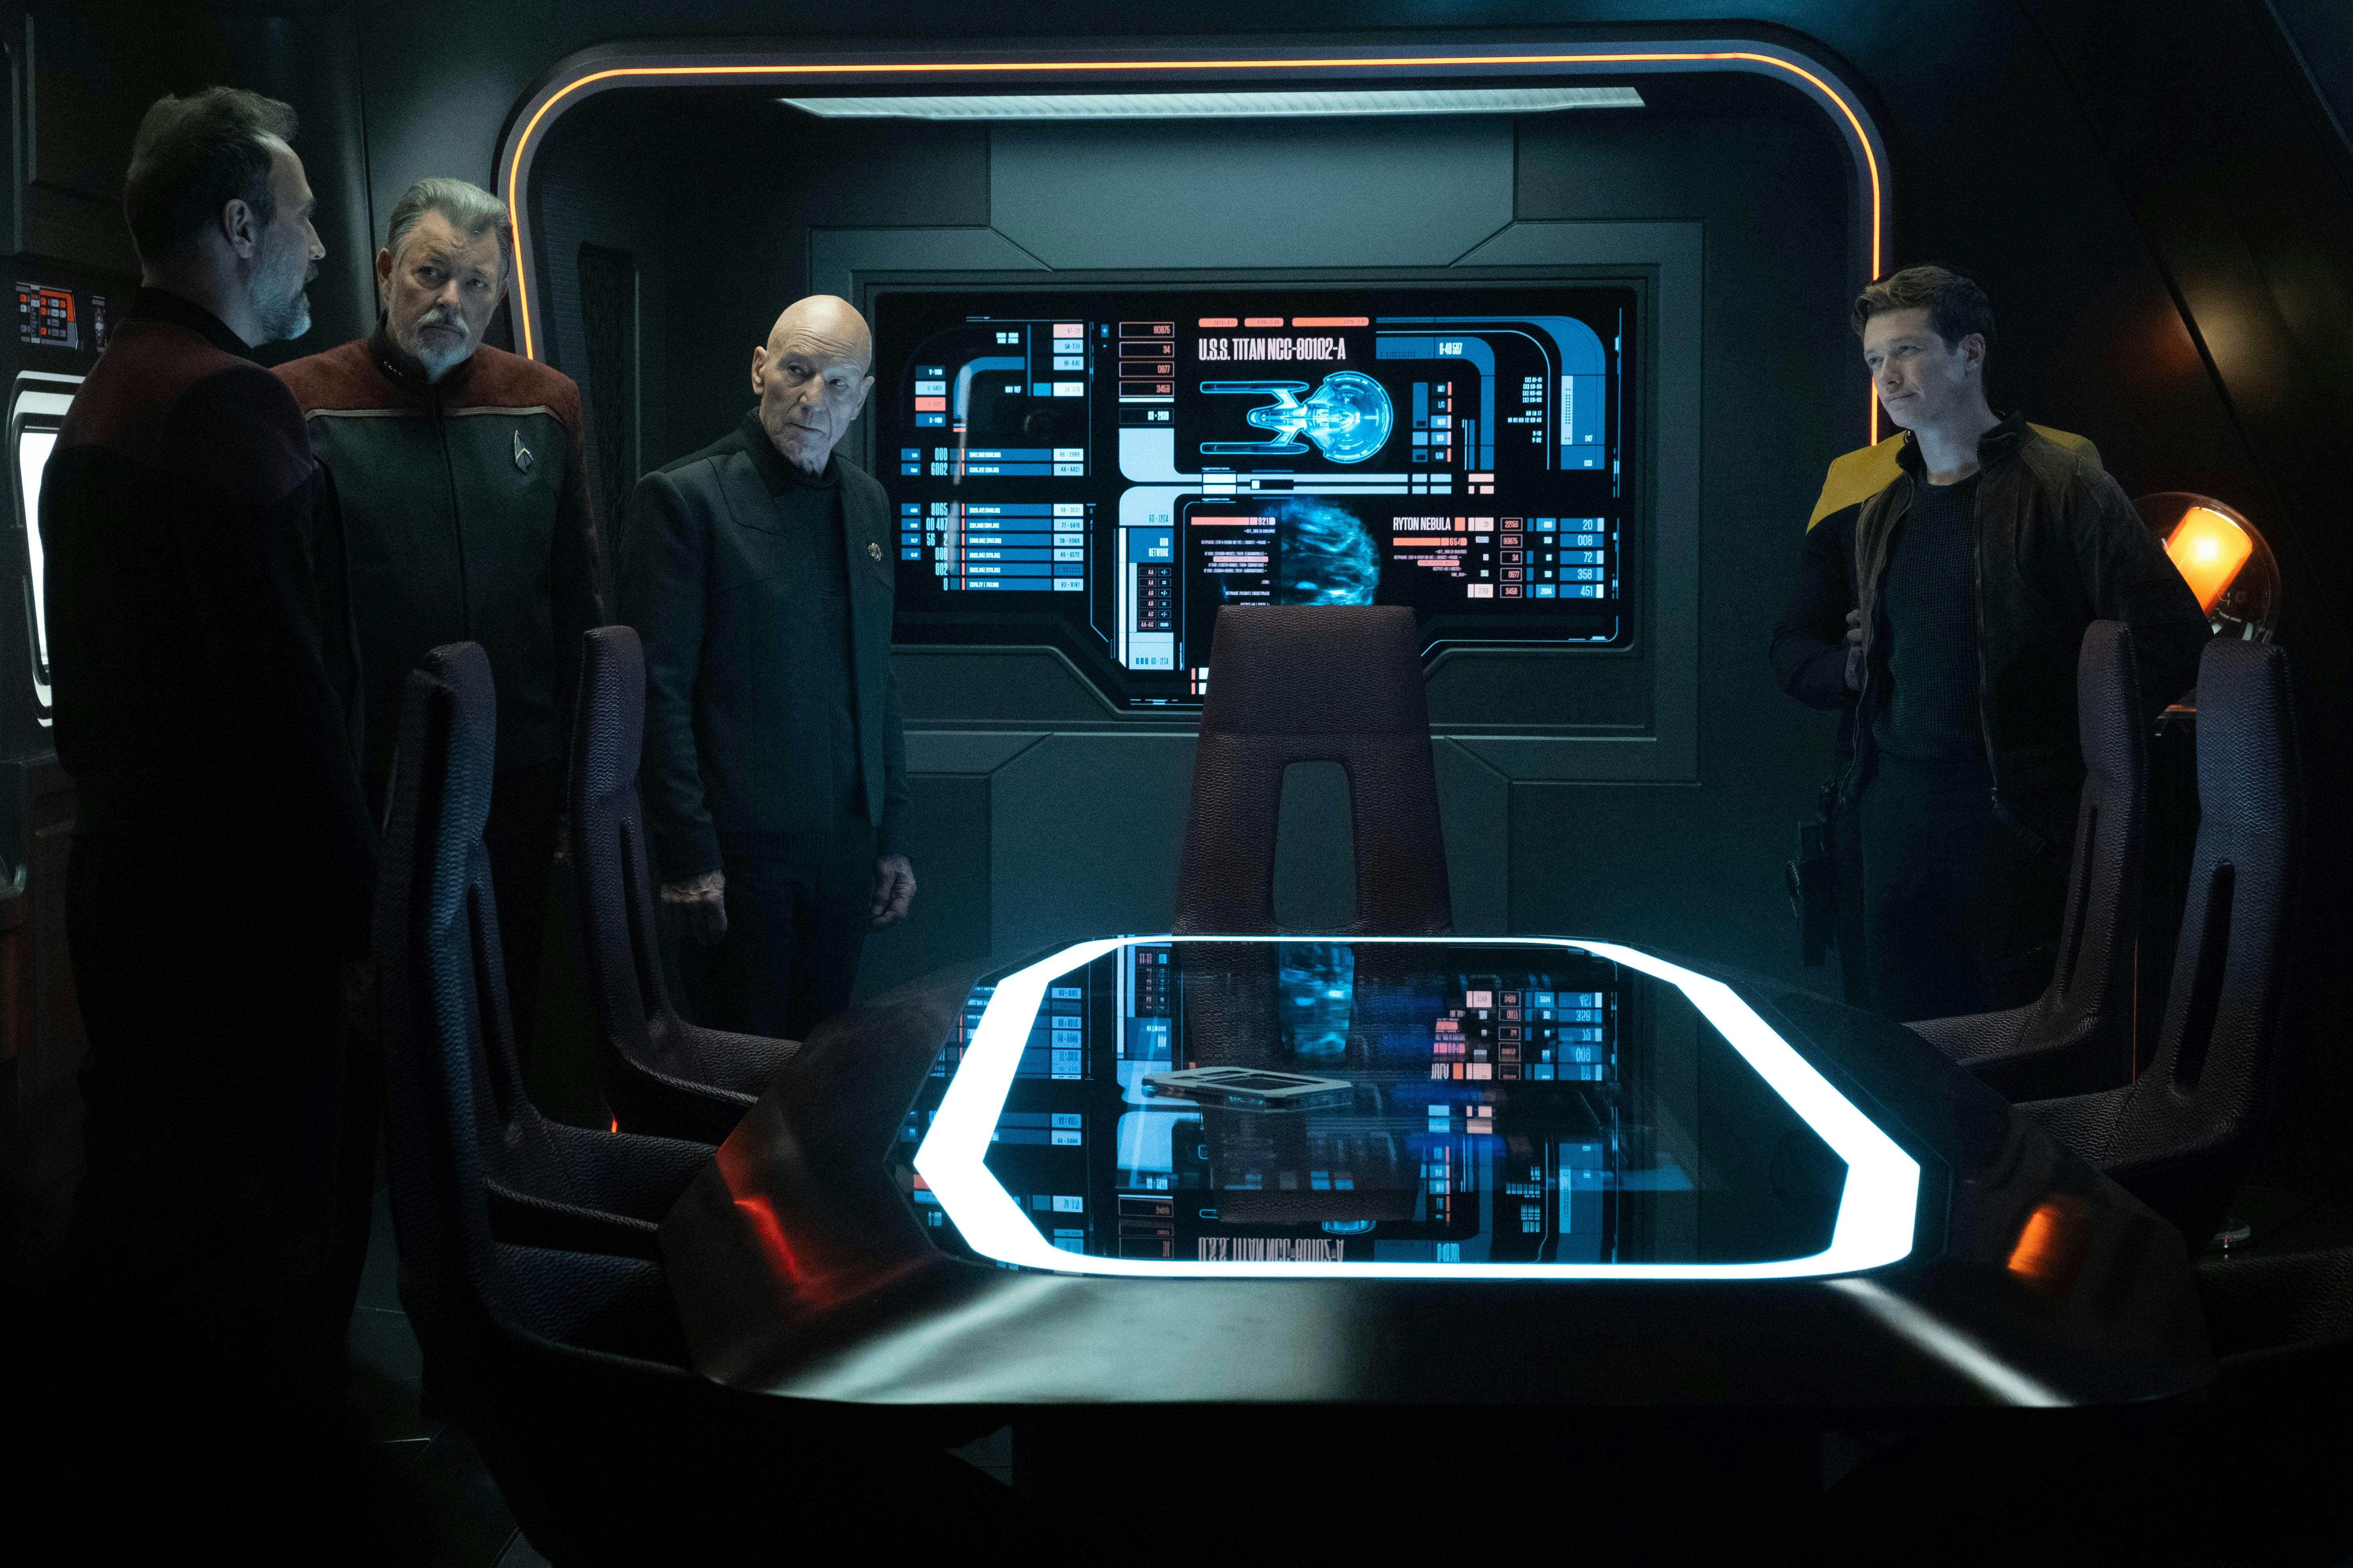 In the Titan's Observation room, Shaw, Riker, and Picard stand across the table from Jack Crusher